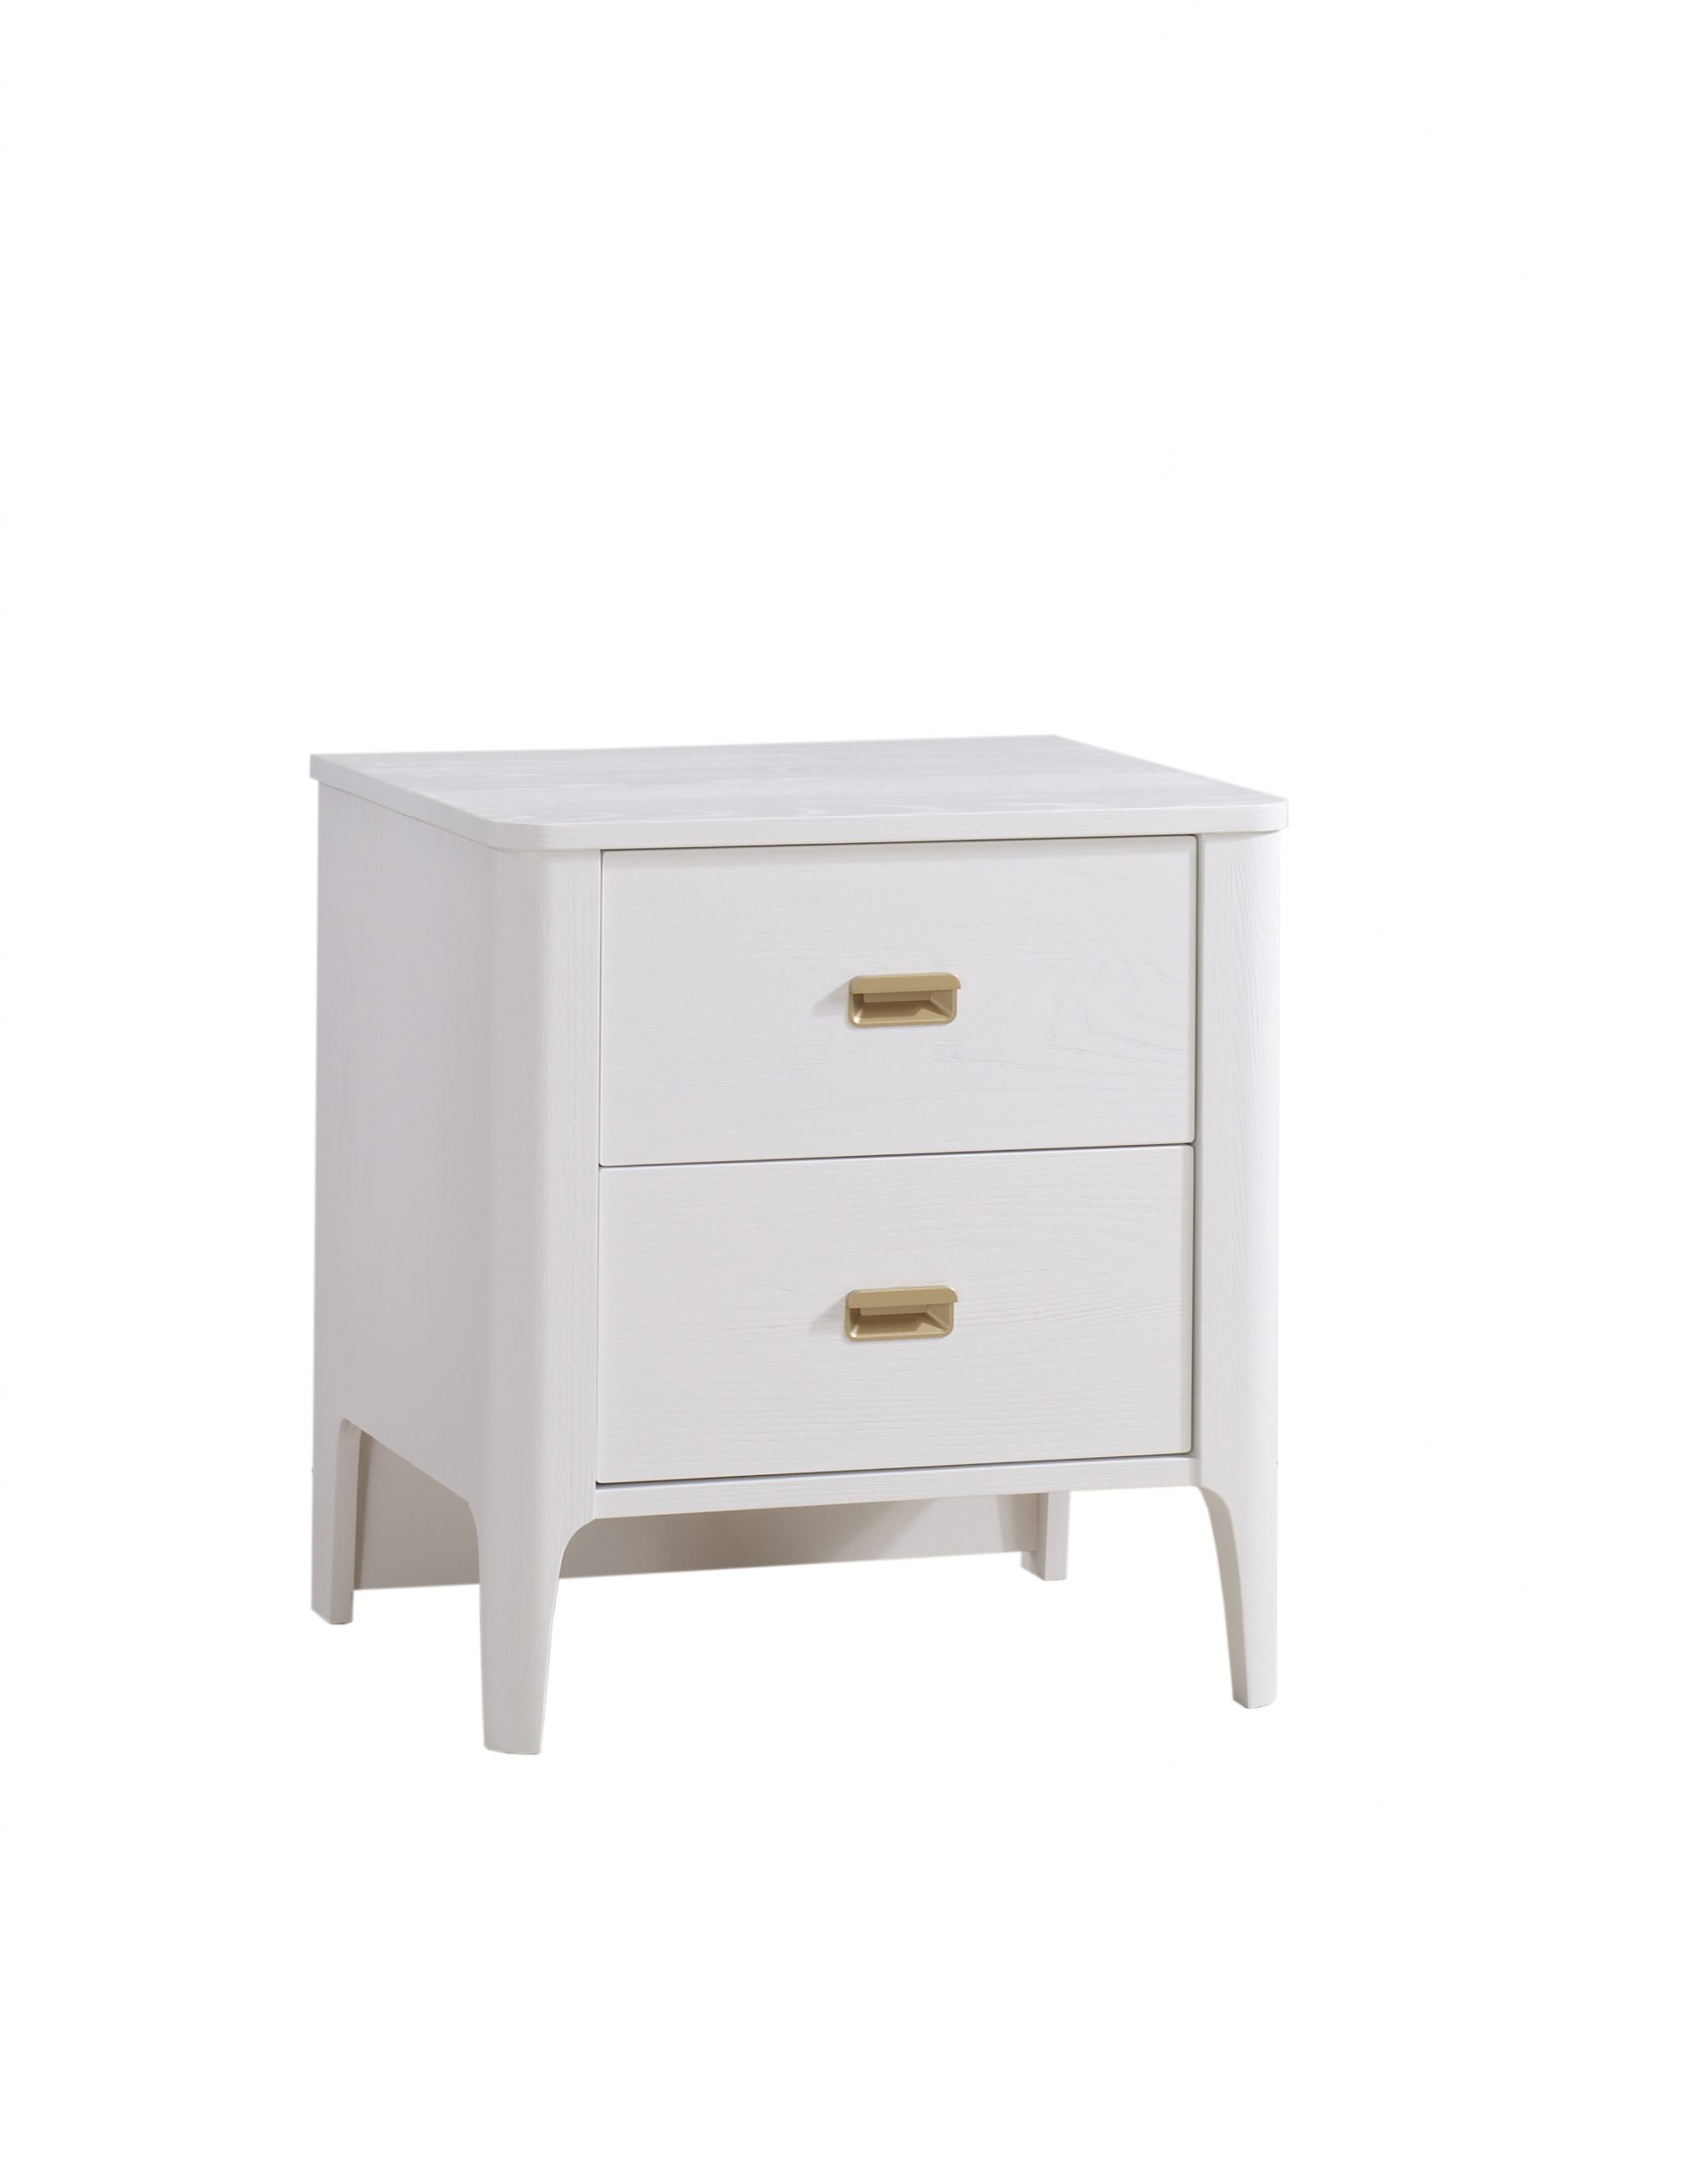 Palo Nightstand in White